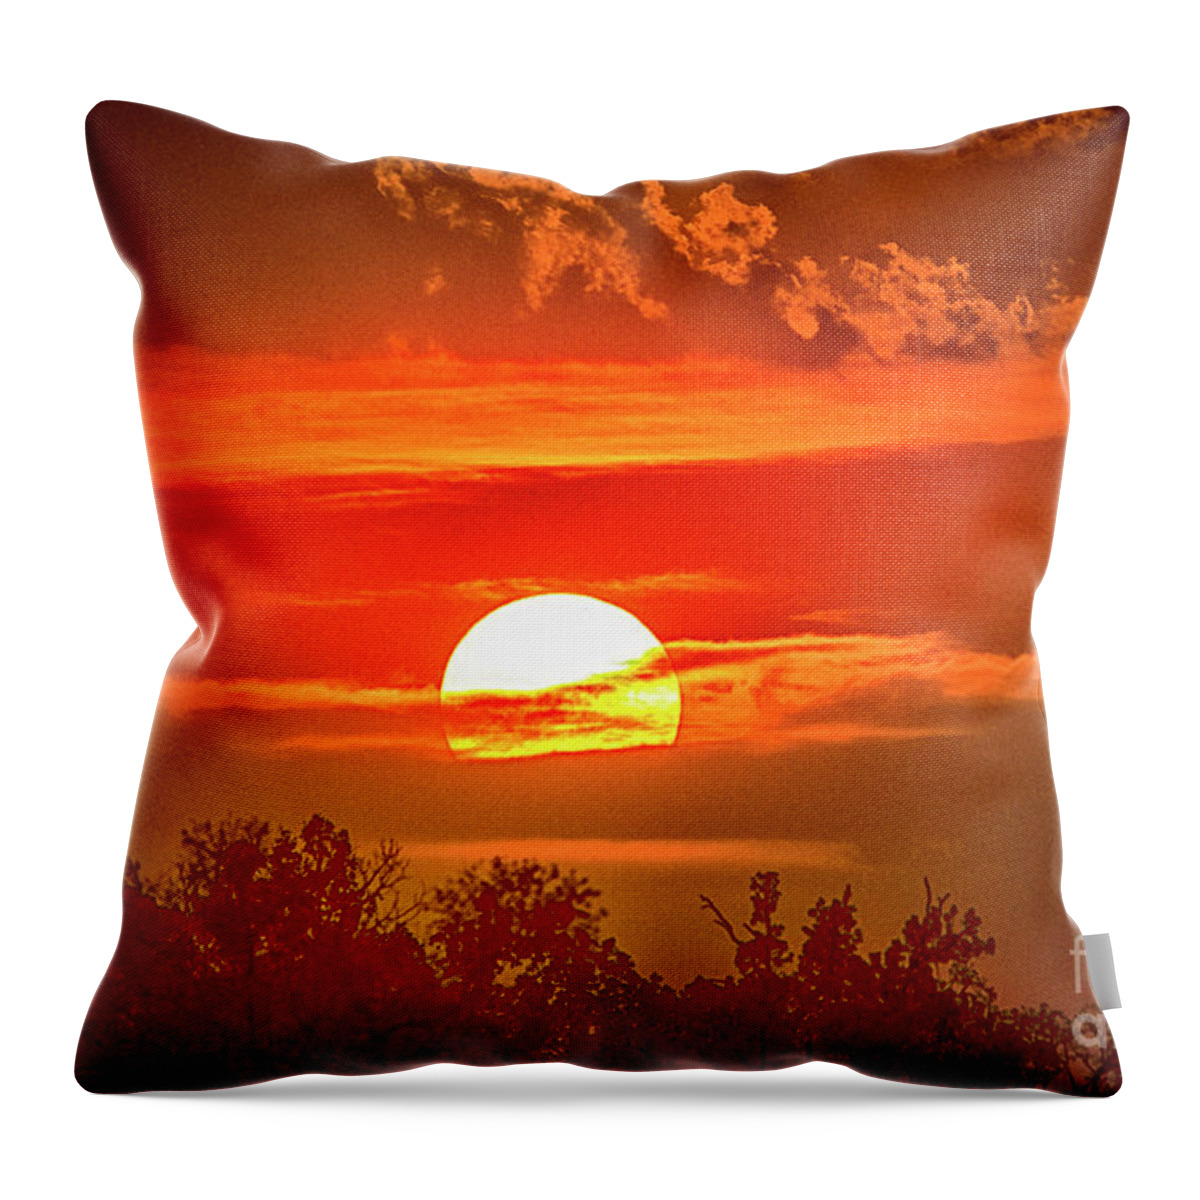 Sunset Throw Pillow featuring the photograph Sunset #2 by Pravine Chester